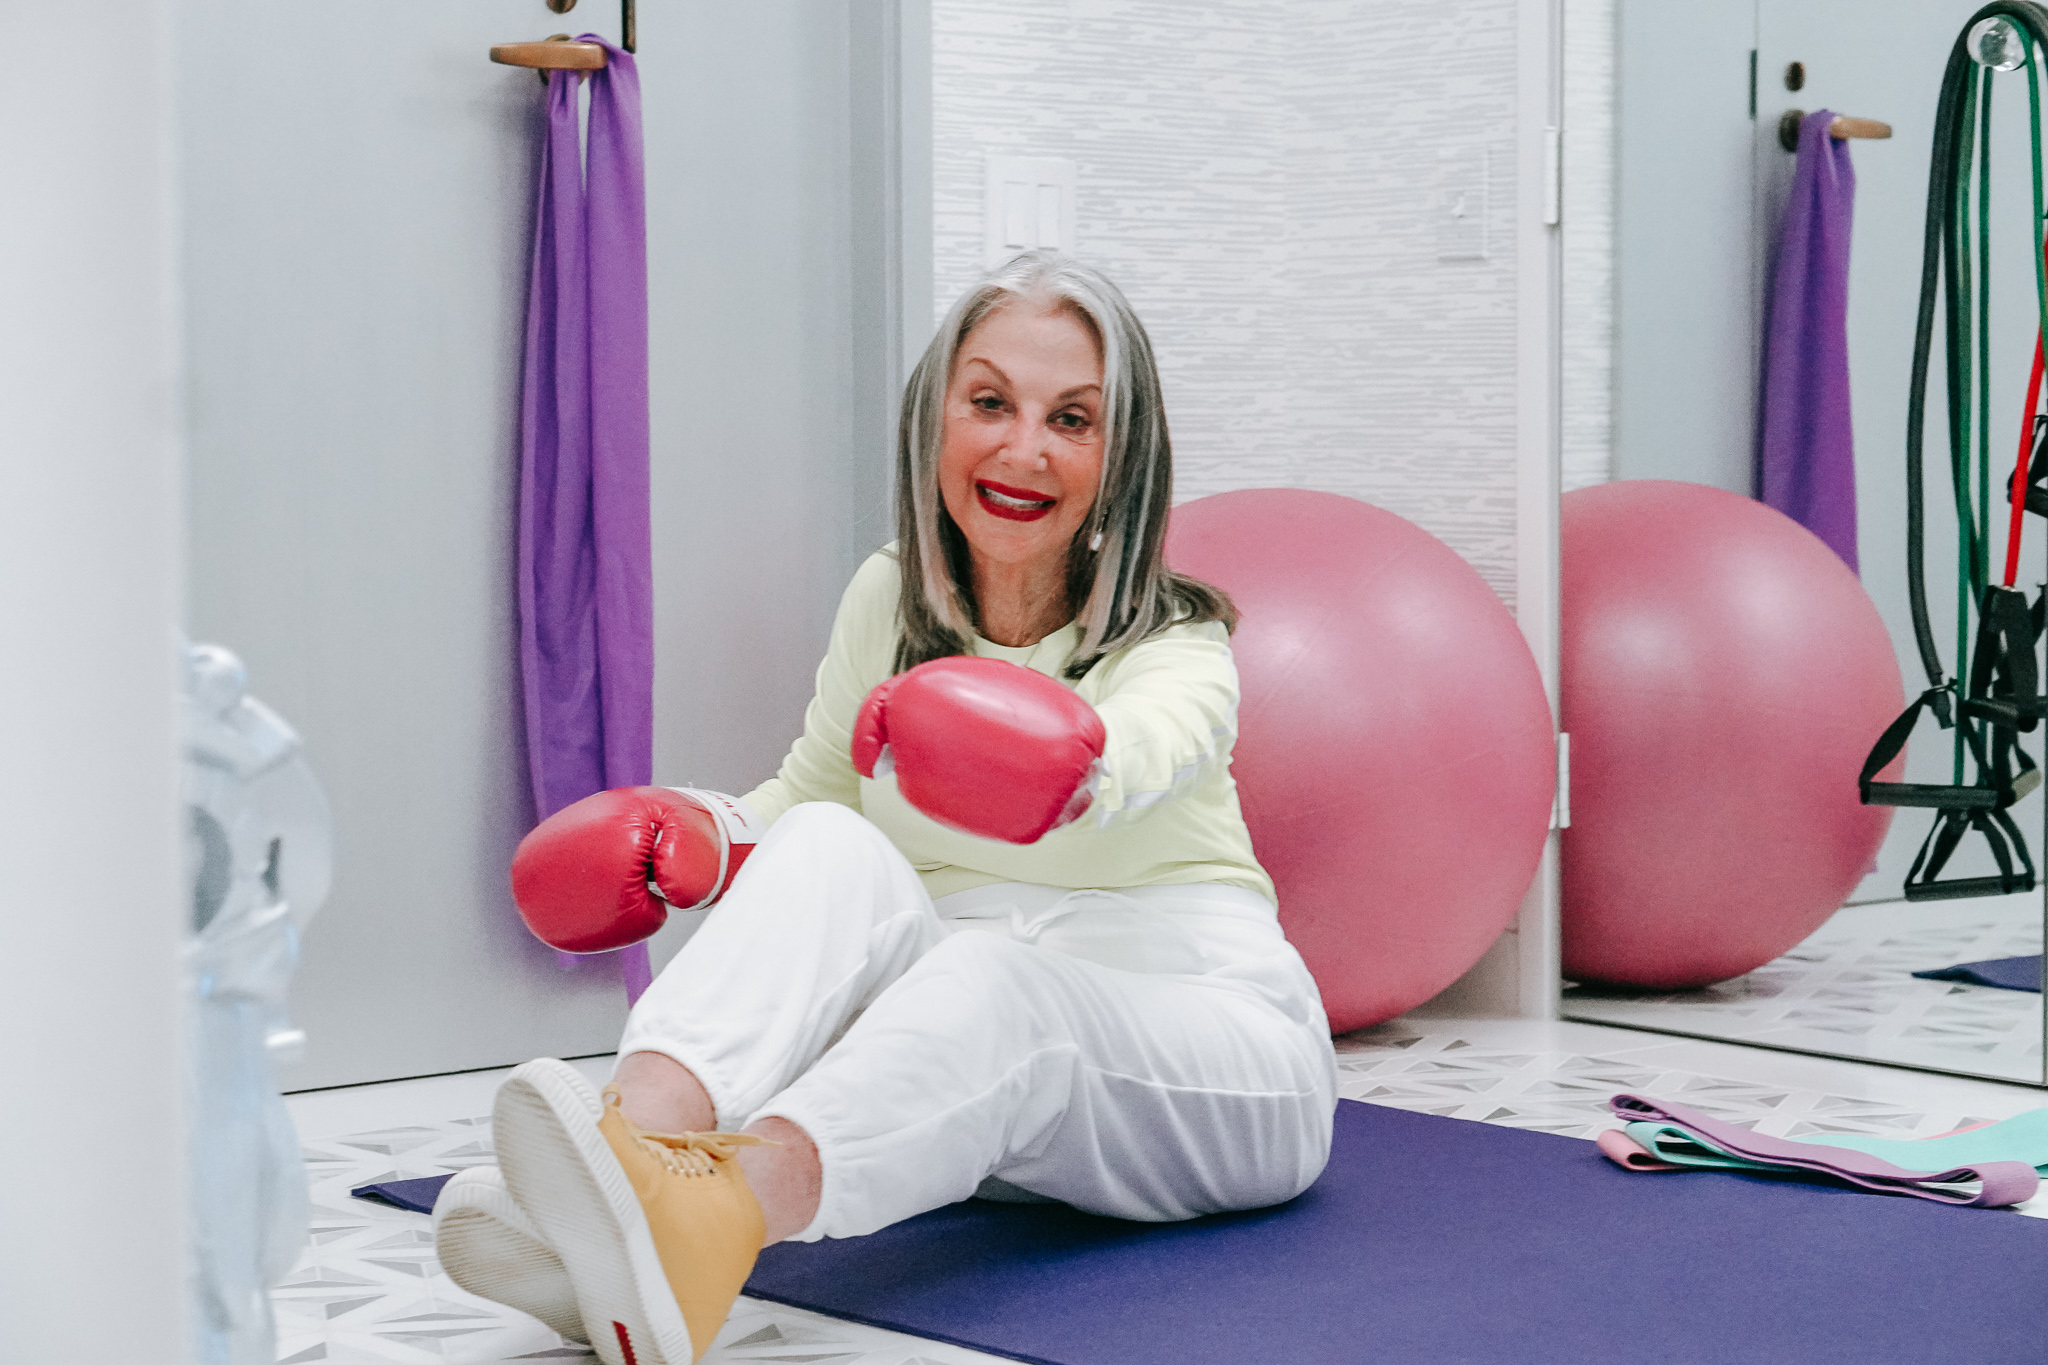 Honey good sitting on yoga mat donning pink boxing gloves fighting for positive aging and body positivity